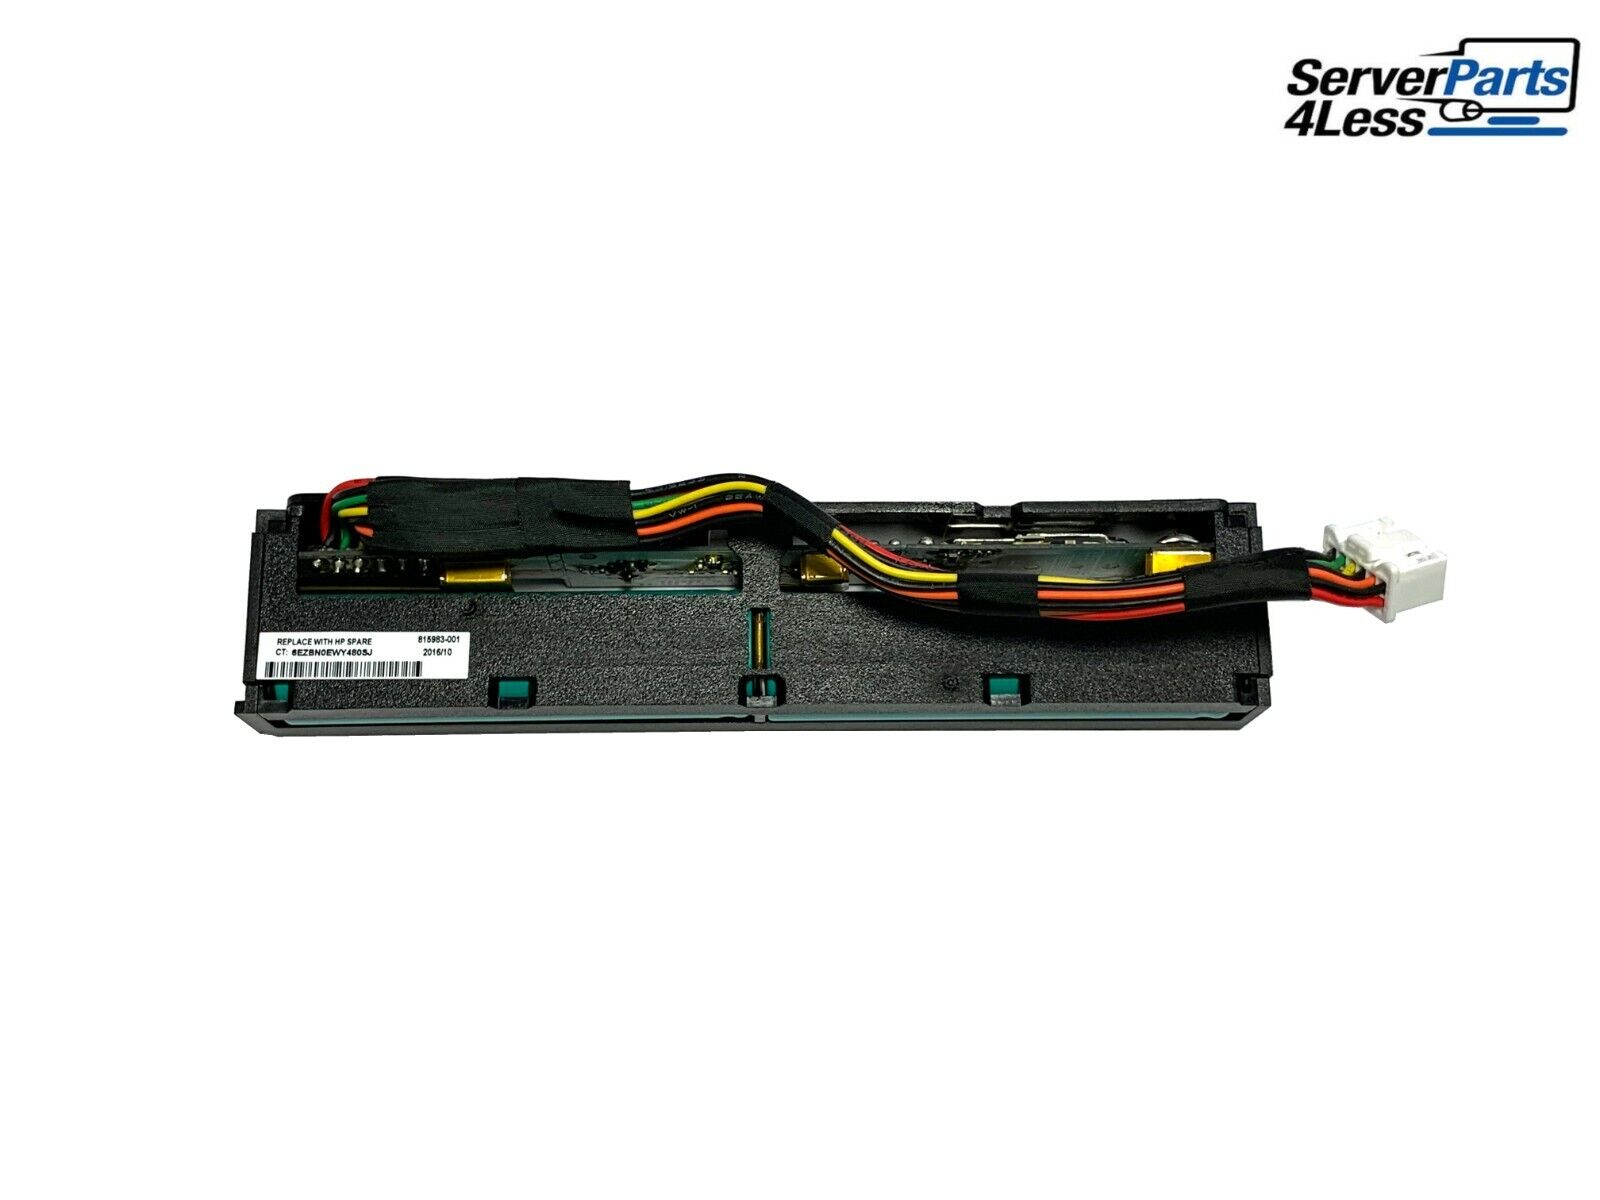 878643-001 HPE 96W SMART STORAGE BATTERY WITH 145MM CABLE P01366-B21 871264-001